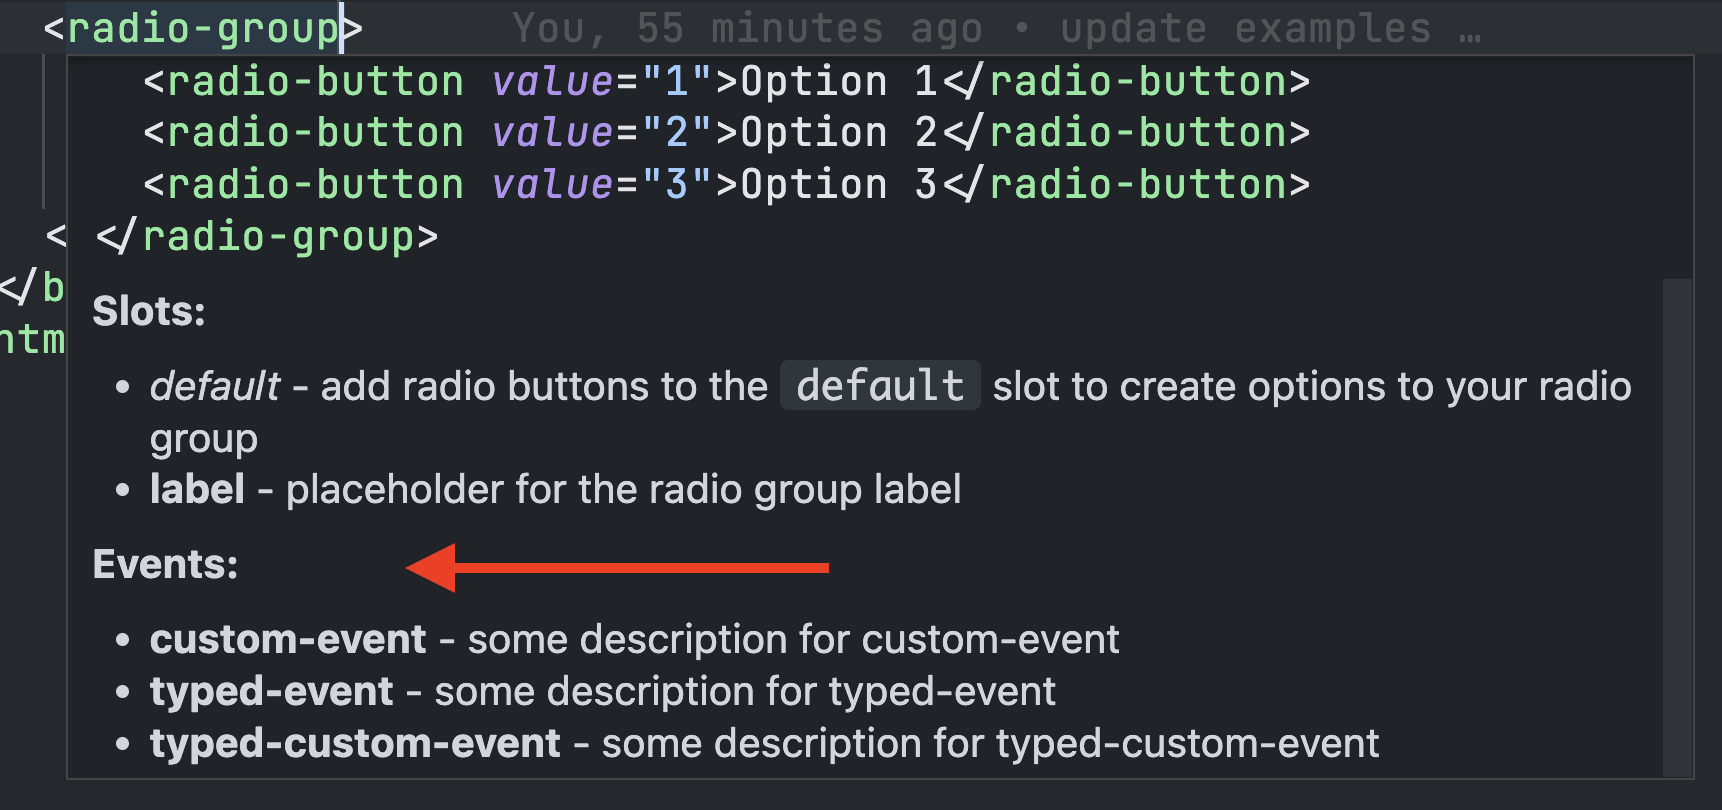 events section of autocomplete popup from vs code